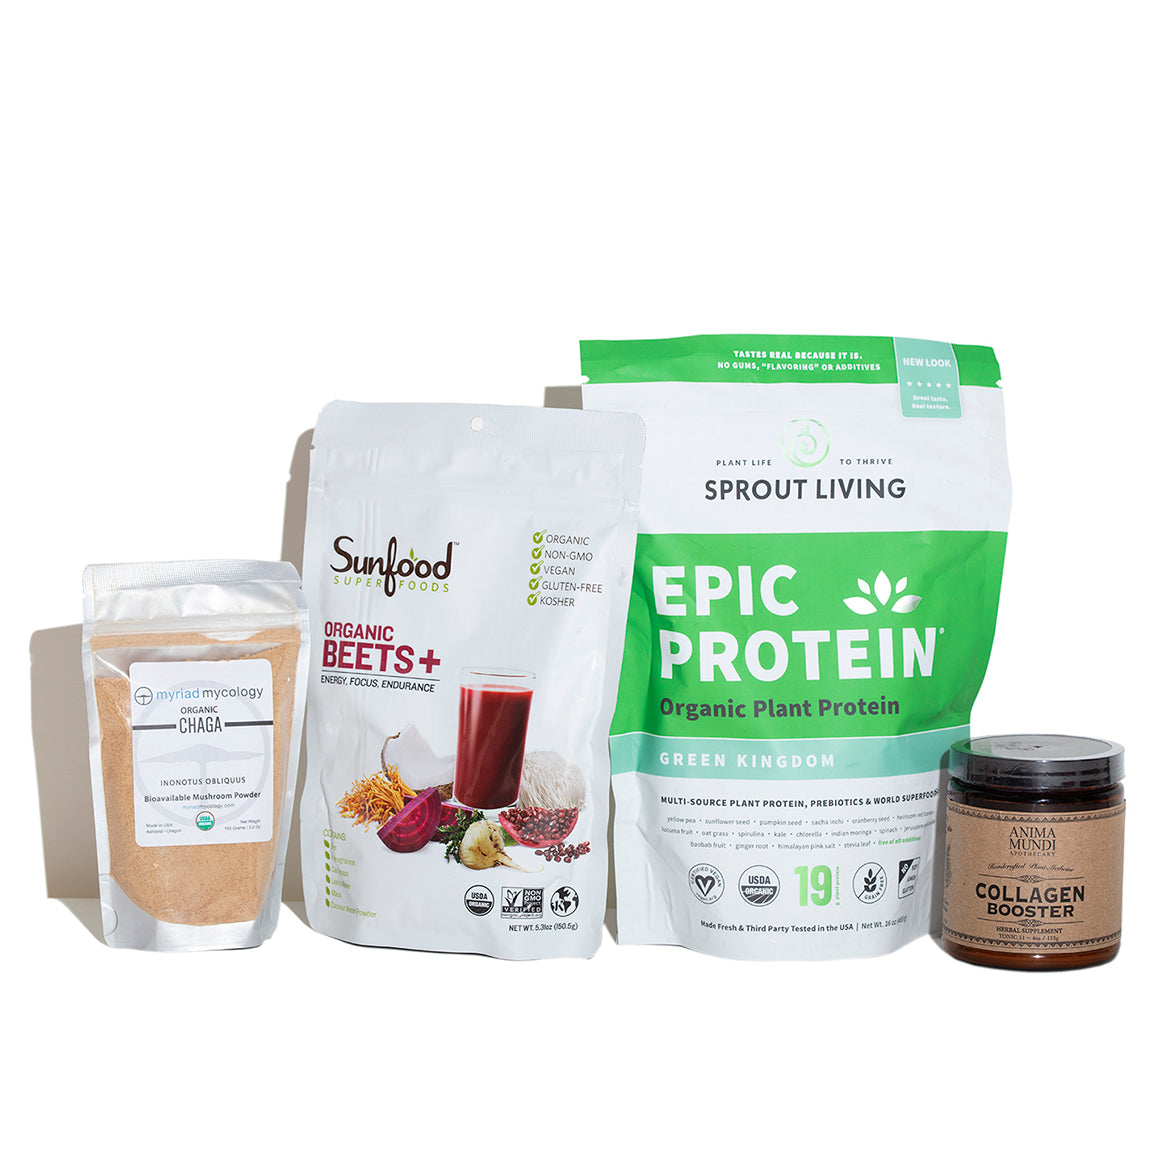 Products included in the Elevate Your Smoothie Kit